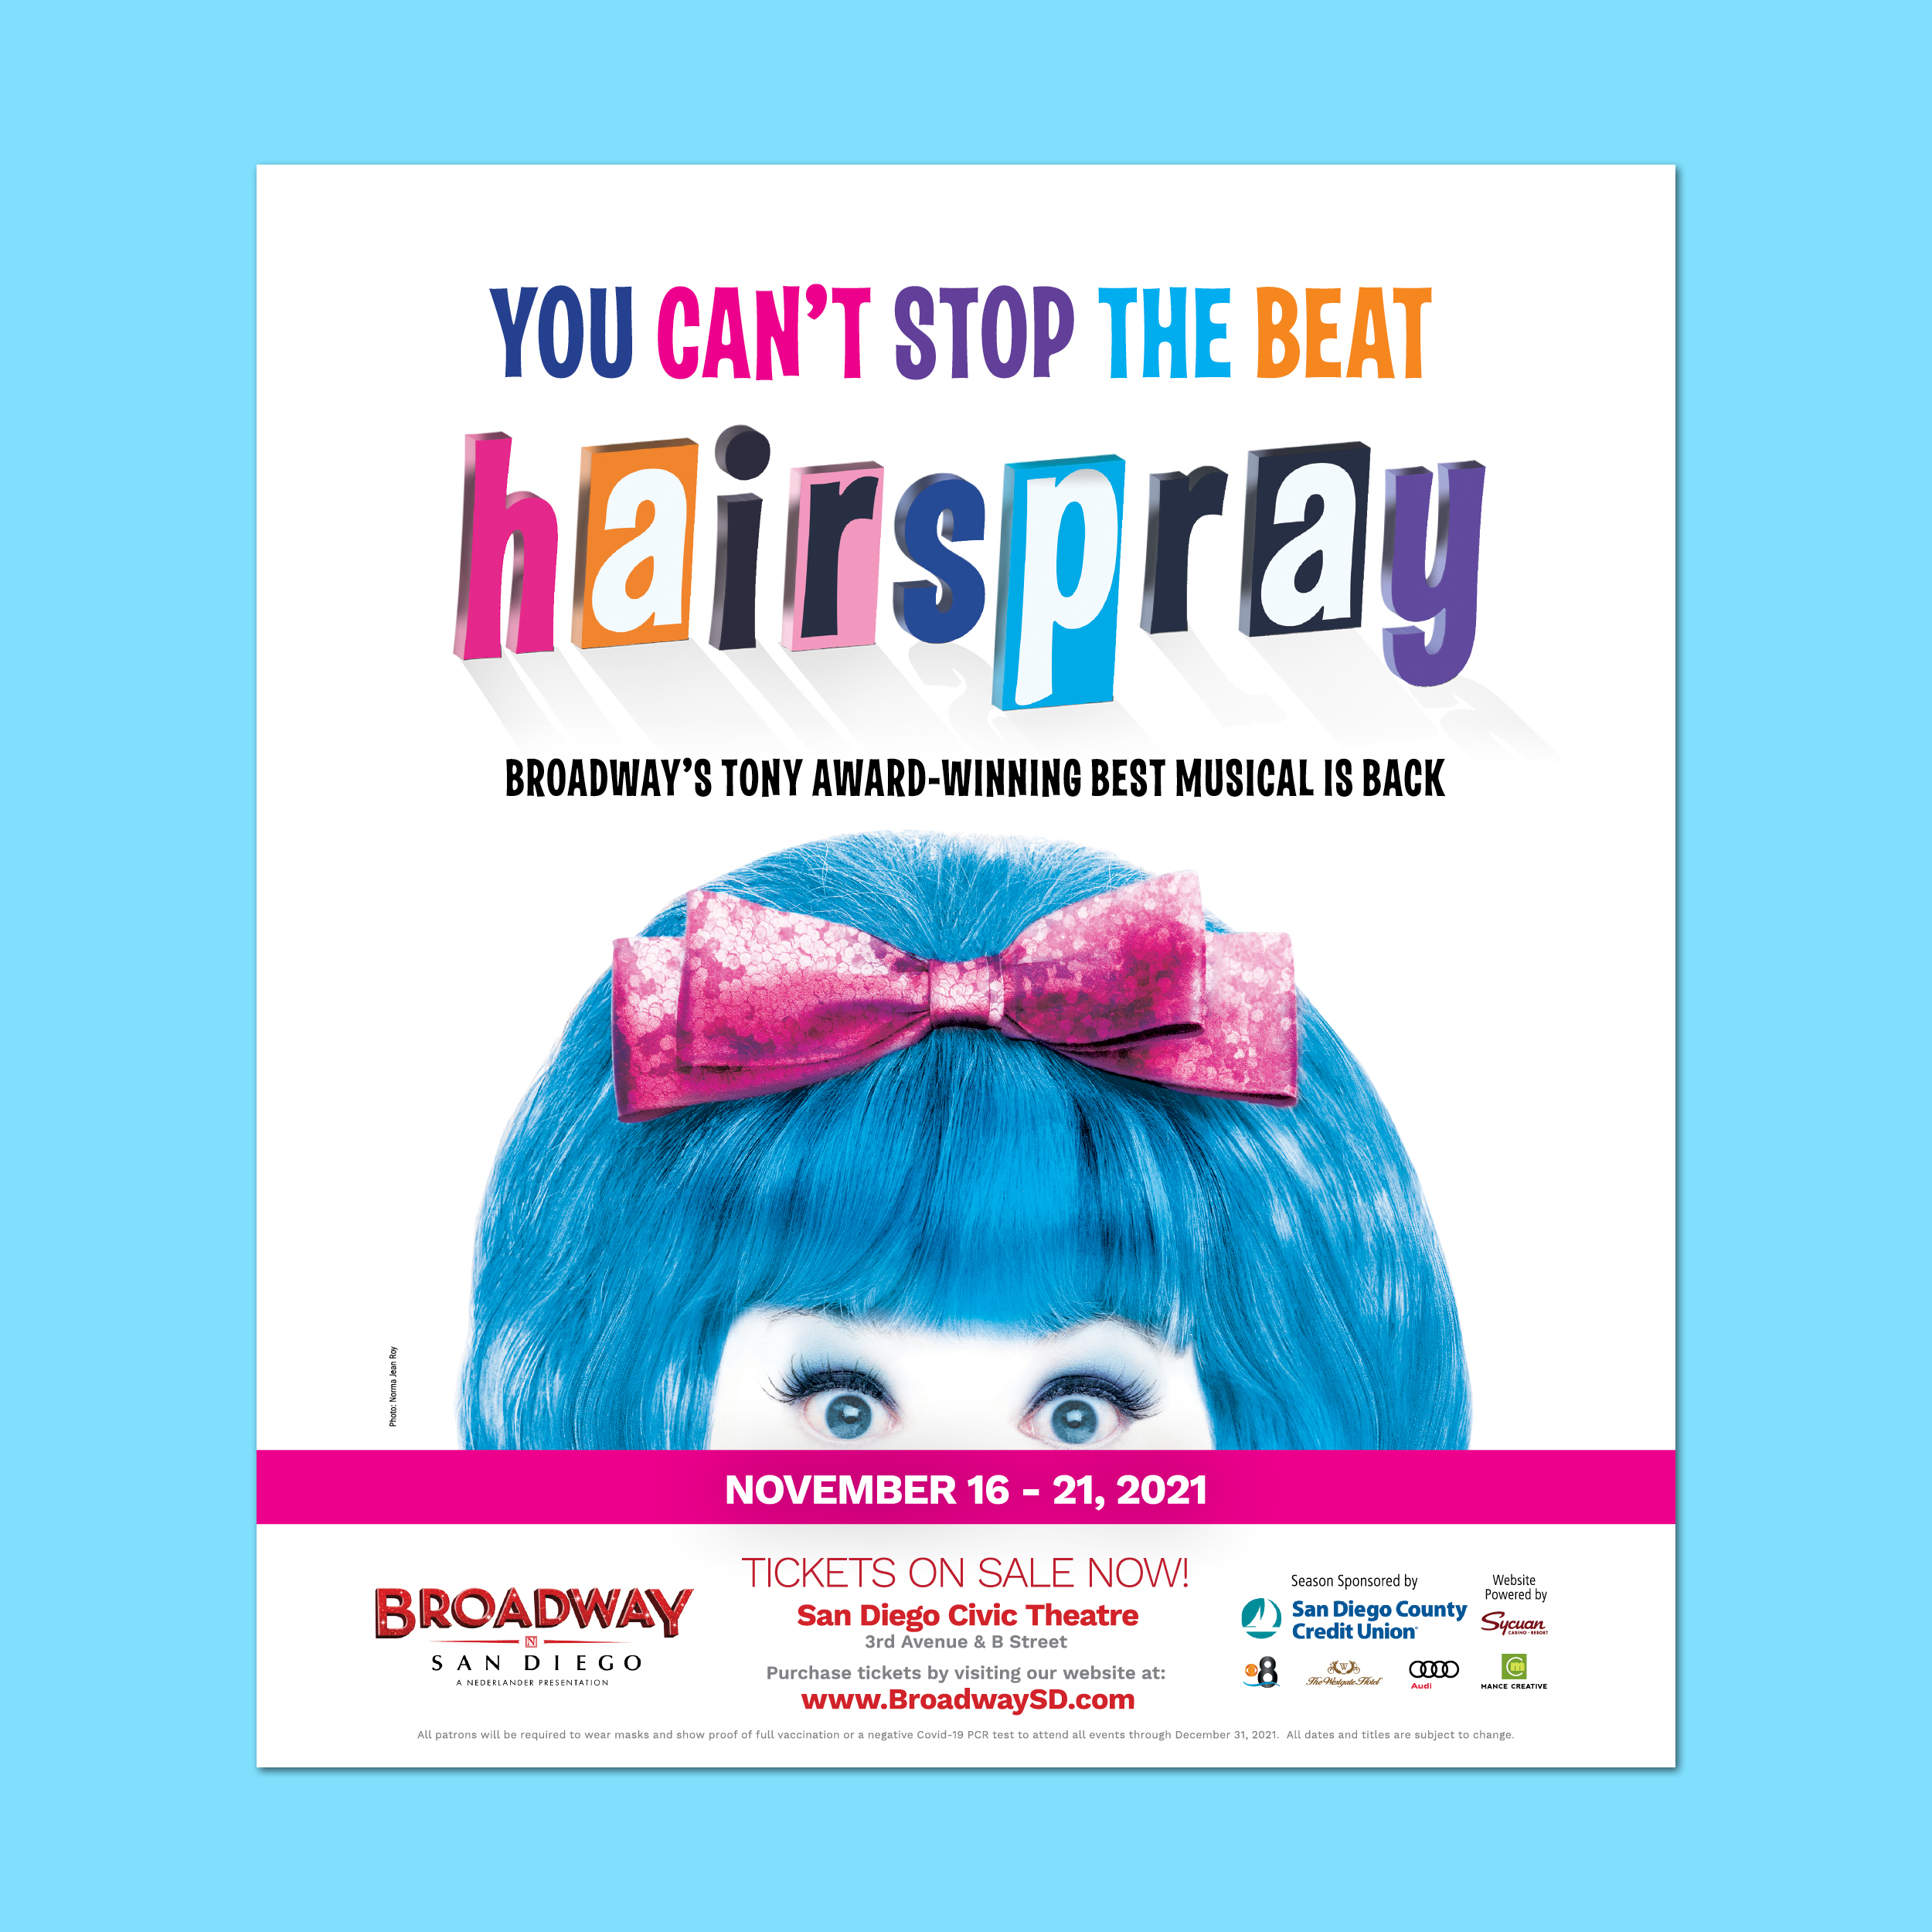 You Can't Stop the Beat Hairspray Broadway Musical advertisement